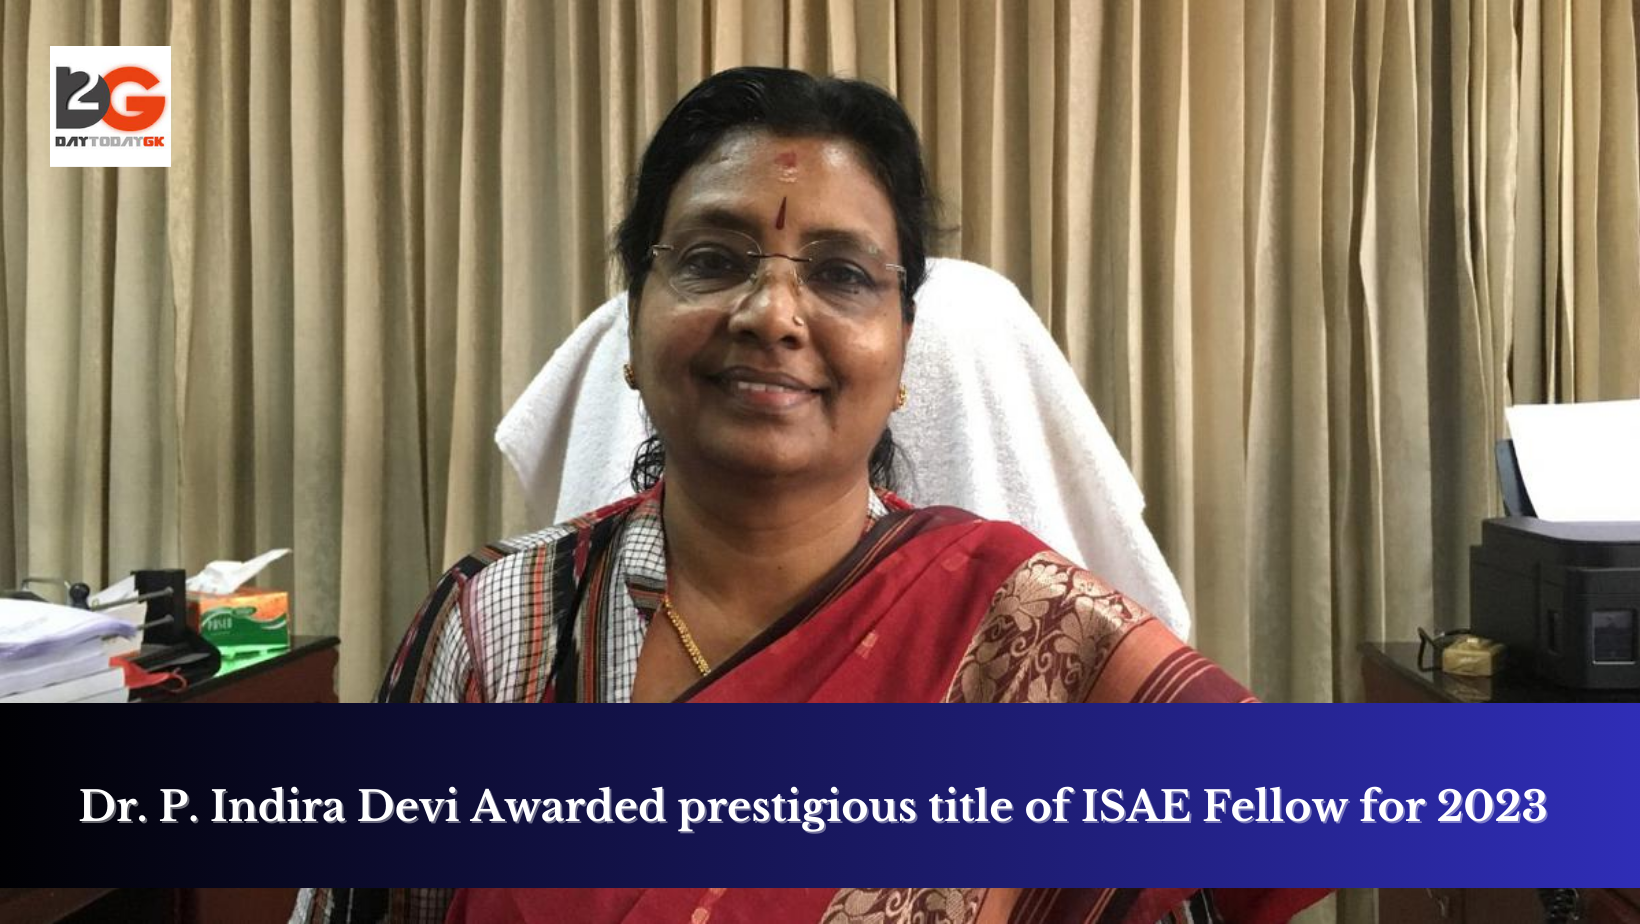 Dr. P. Indira Devi Awarded prestigious title of ISAE Fellow for 2023